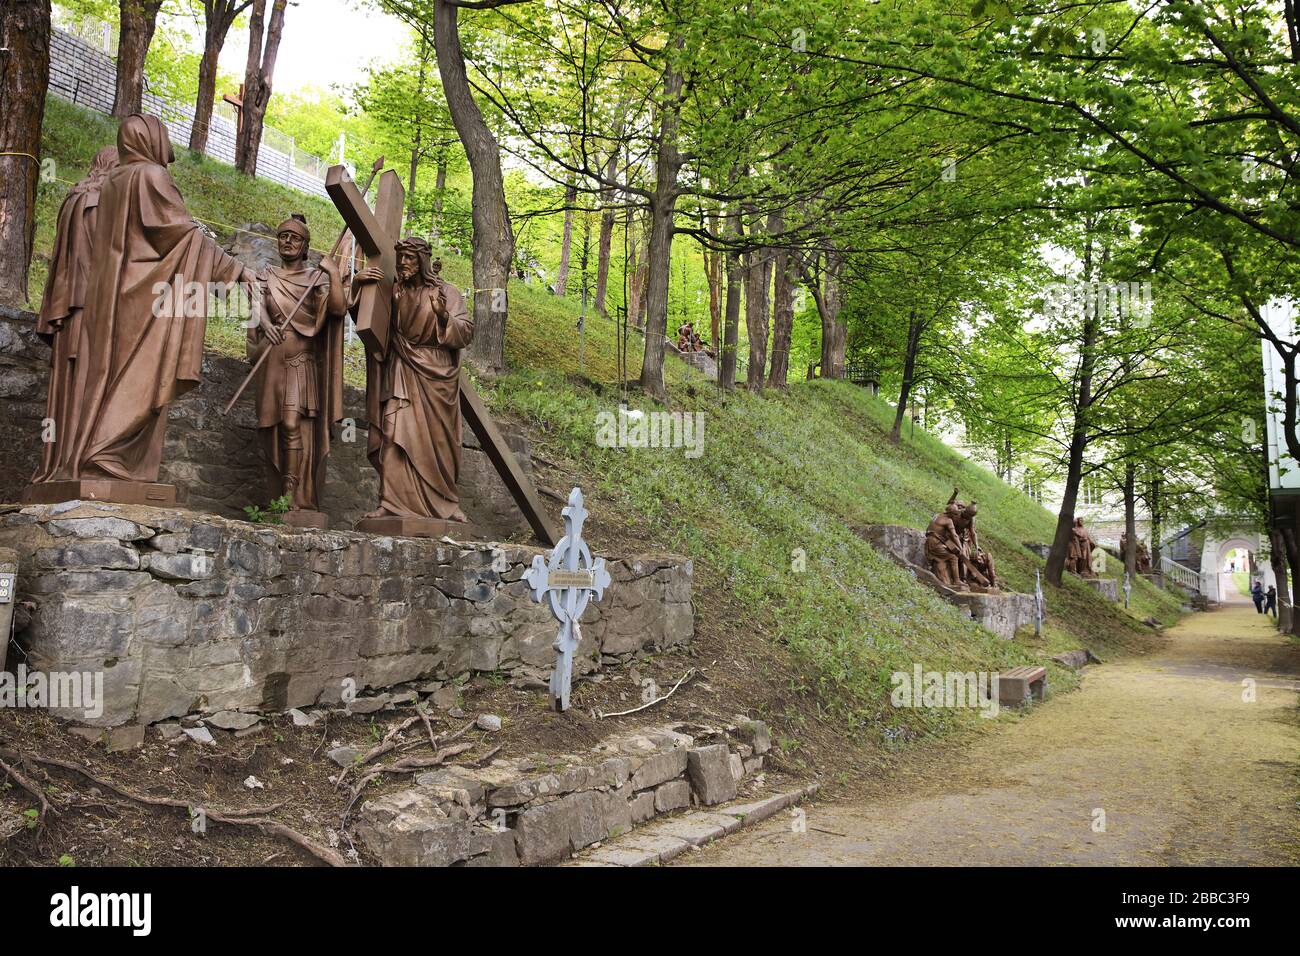 Stations of the cross along the Way of the cross on a hillside next to the Basilica of Sainte-Anne-de-Beaupre, Sainte-Anne-de-Beaupre, Quebec, Canada Stock Photo